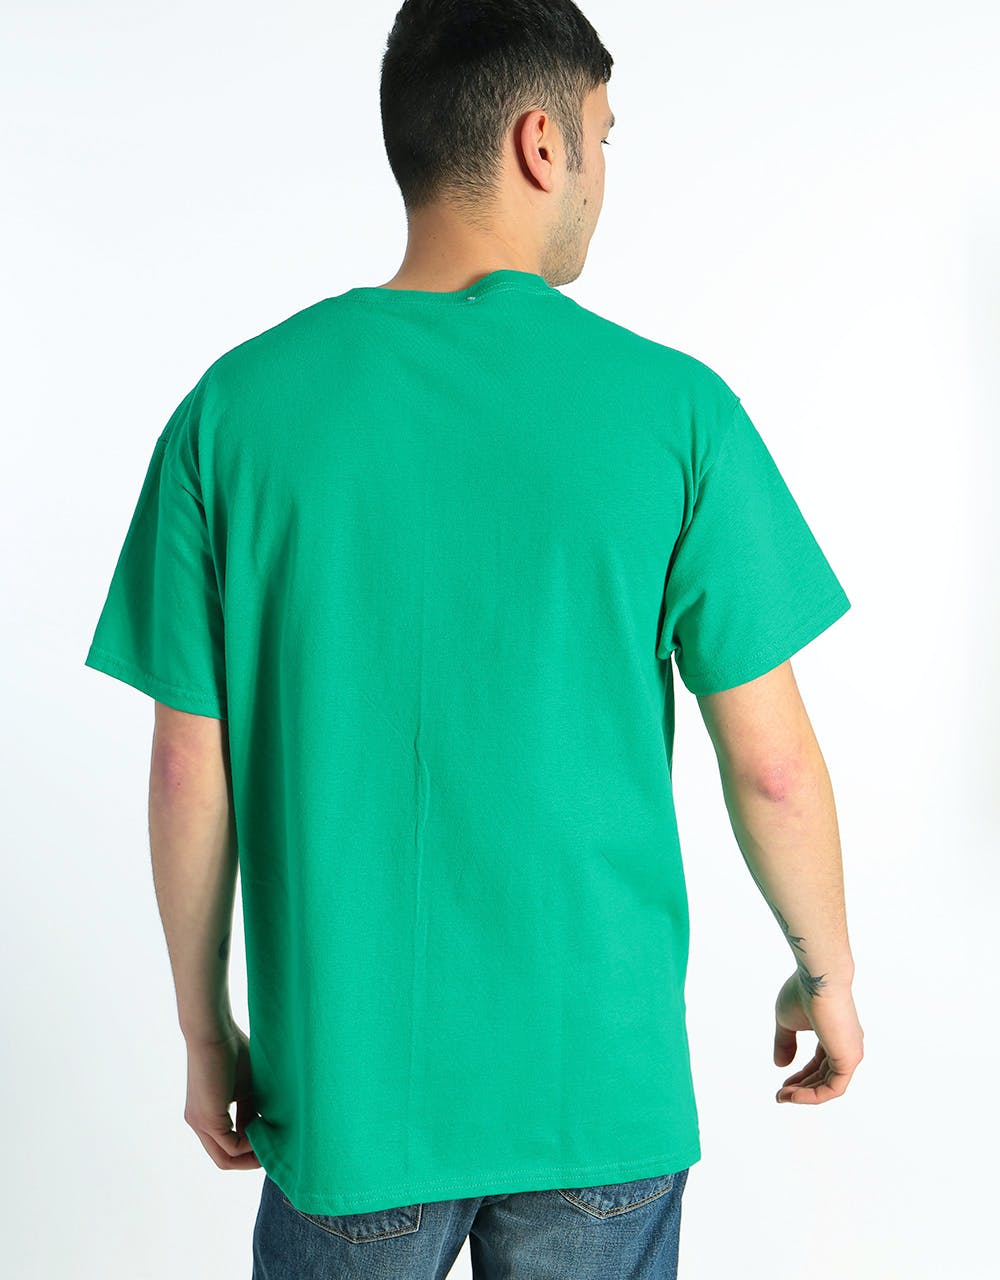 Route One Cavalry T-Shirt - Kelly Green